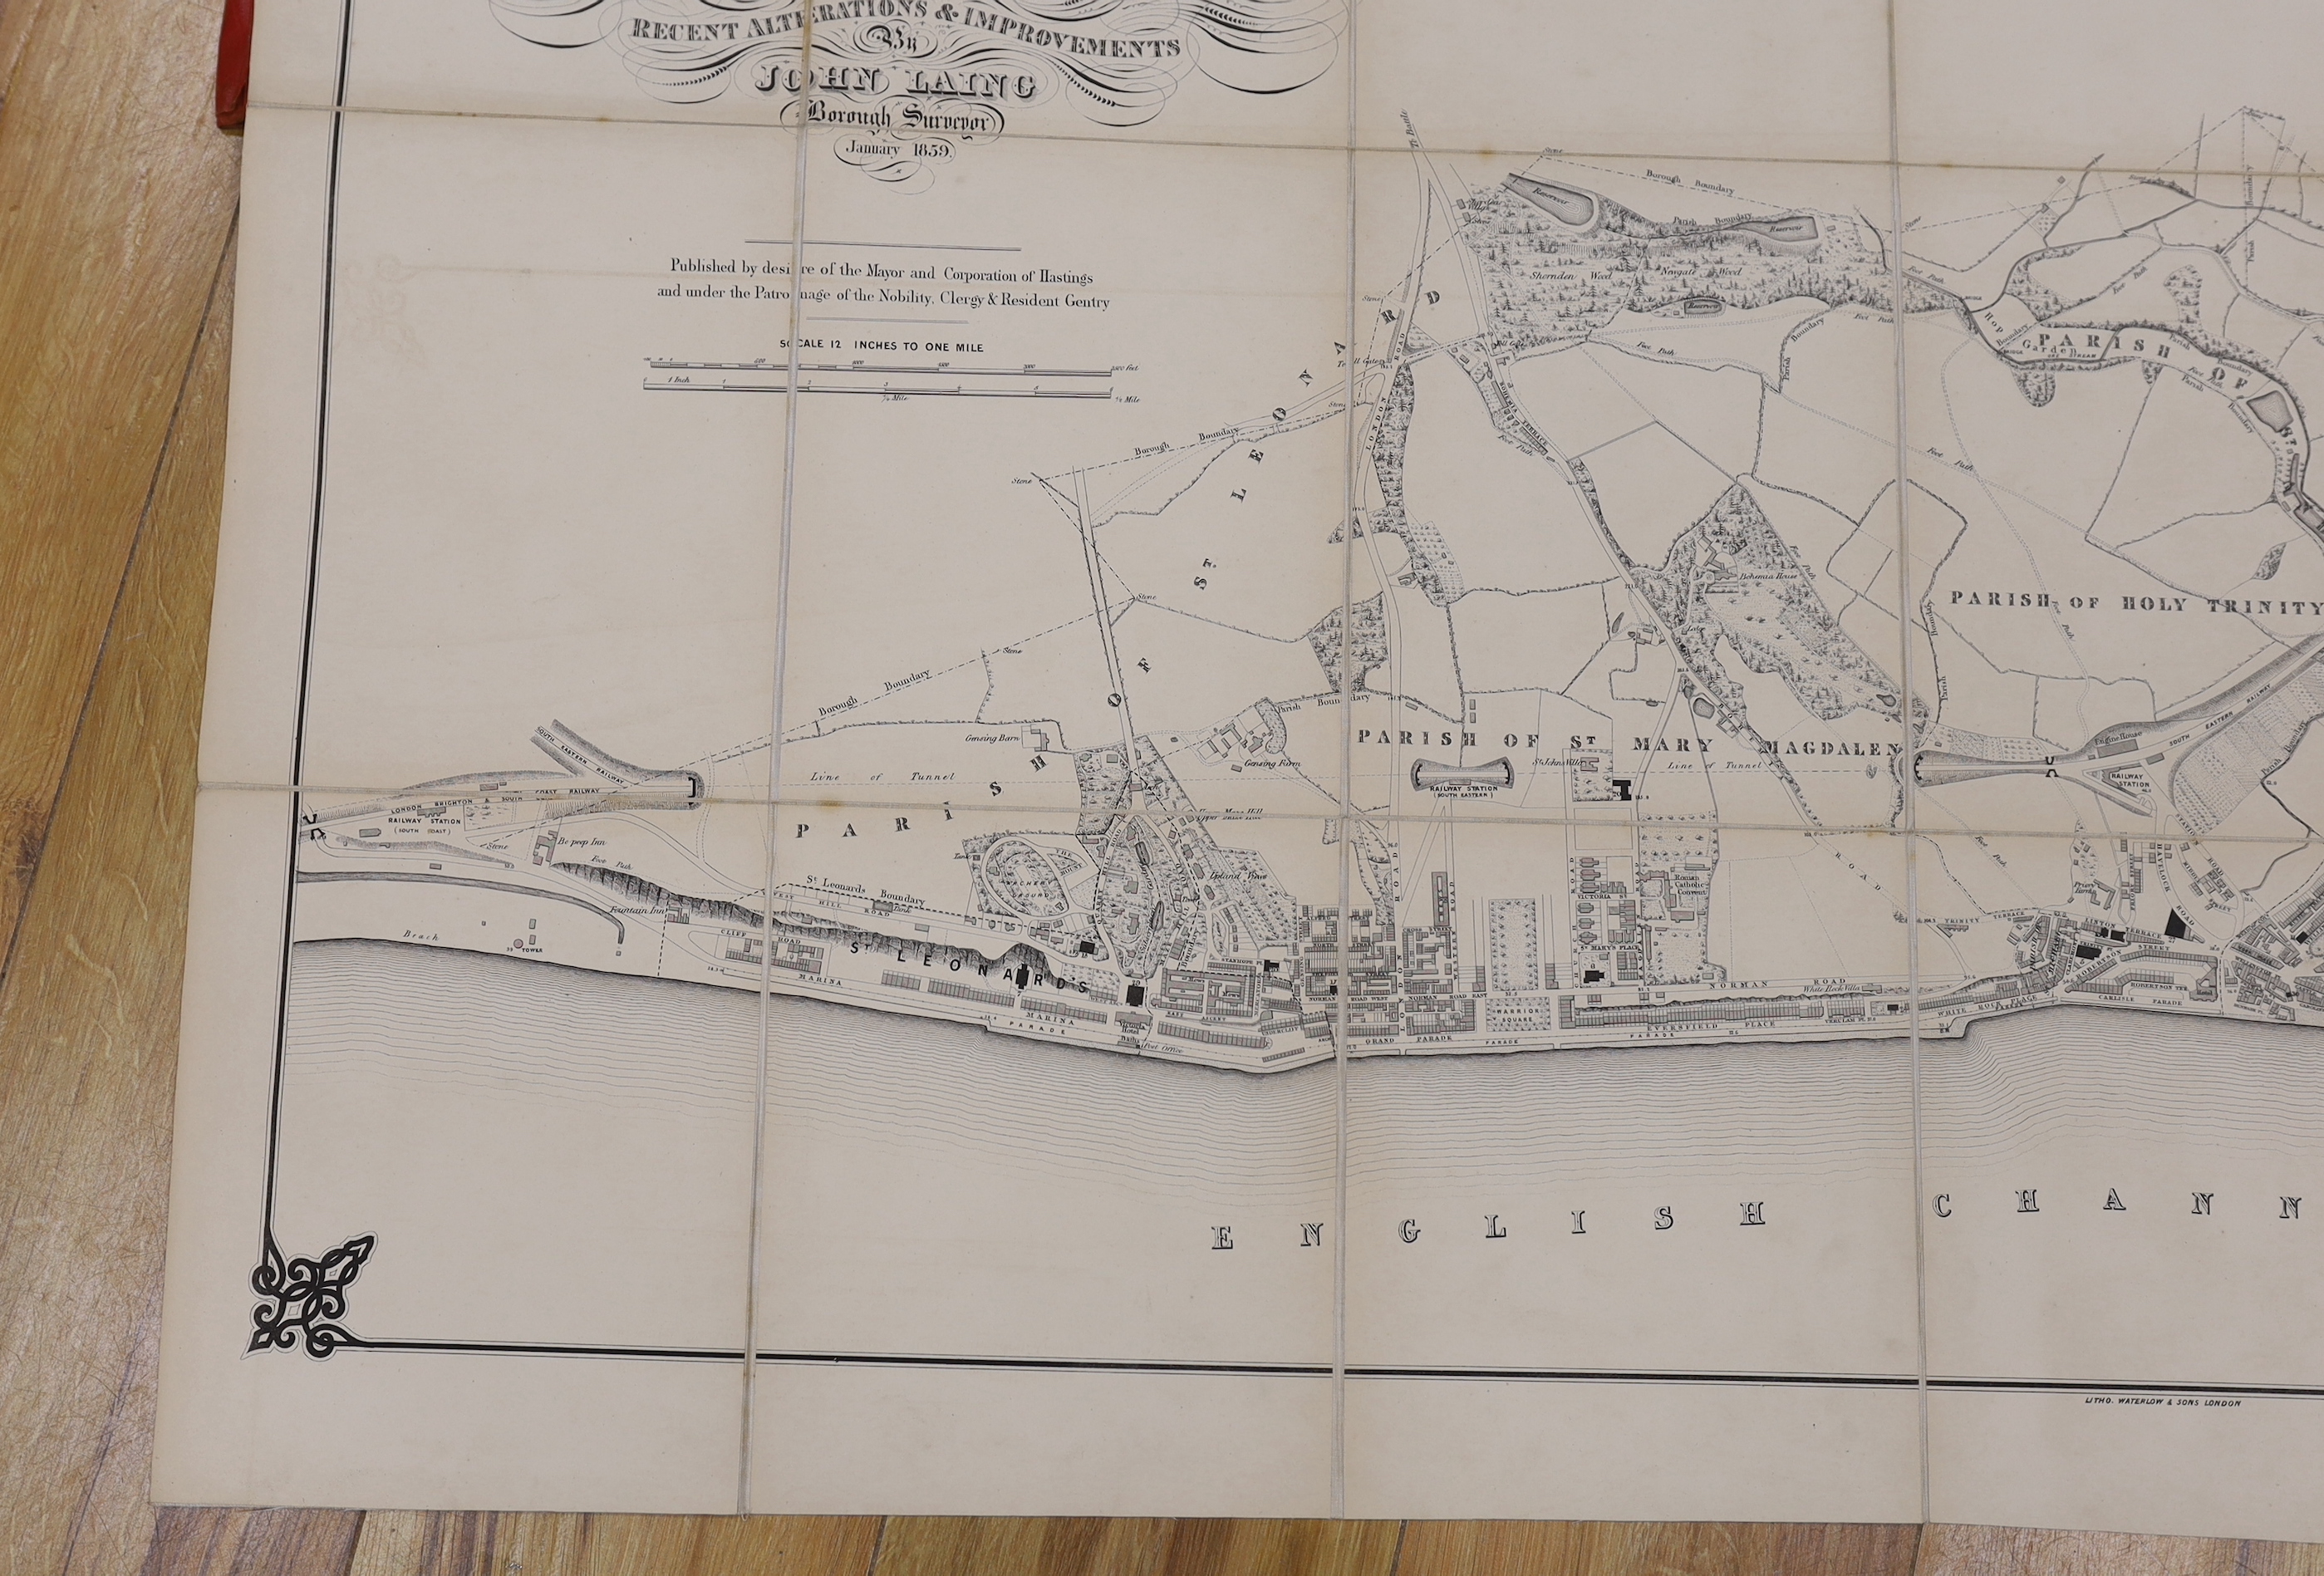 HASTINGS - Laing, John (Borough Surveyor) - Map of Hastings and St. Leonards, on linen in red cloth binding with gilt lettering, scale: 12 inches to 1 mile, Hastings, January 1859, 68.5 x 131cms